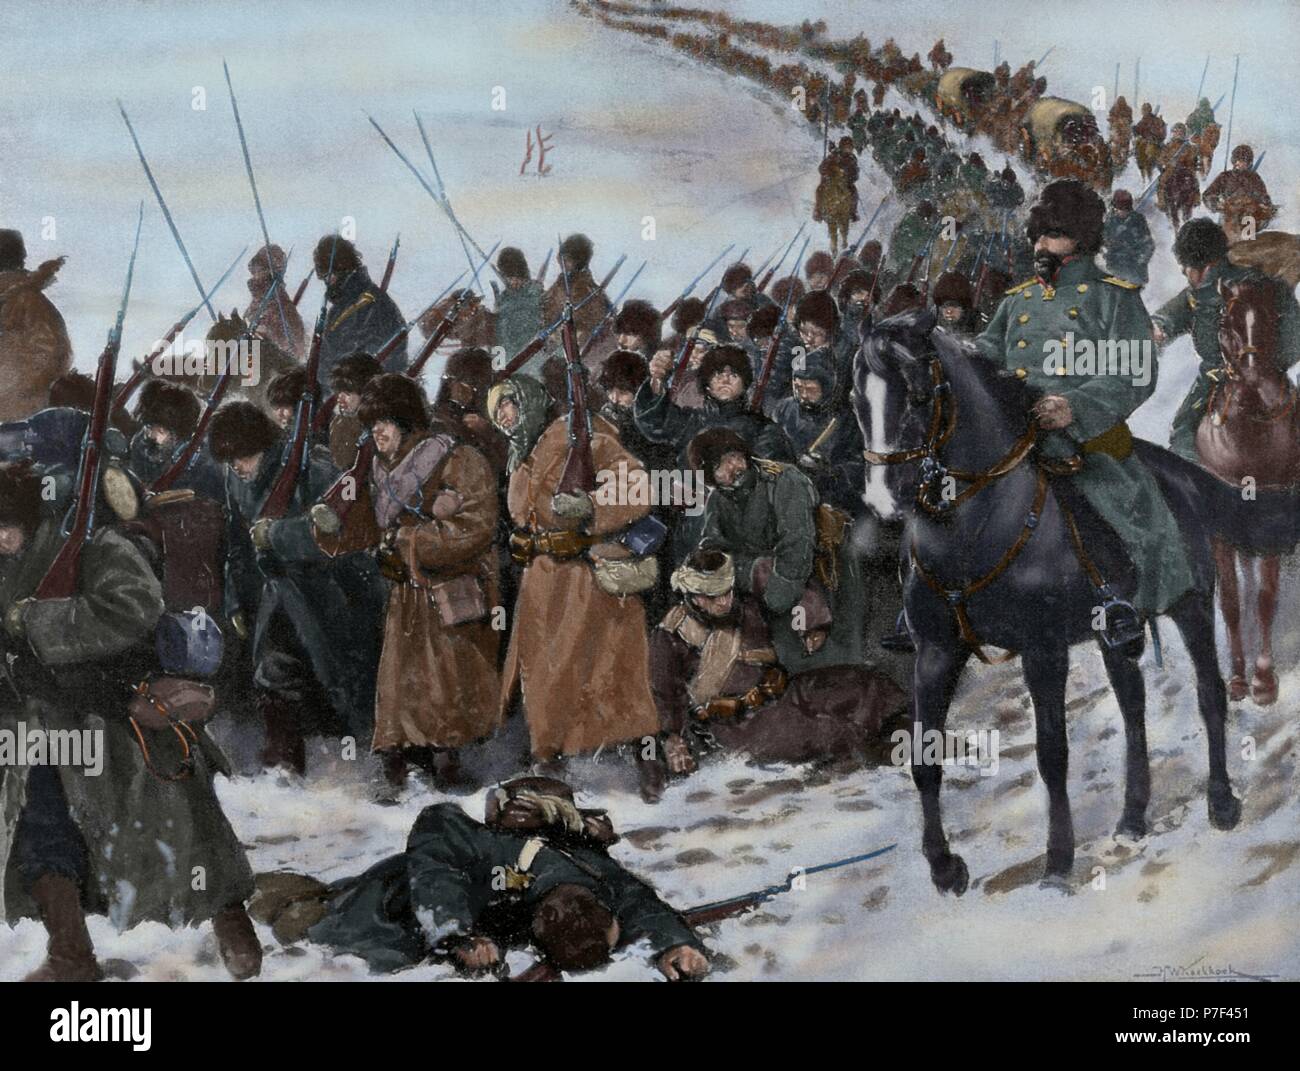 Russo-Japanese War (1904-1905). Column of Japanese soldiers marching under the cold and tiredness of fighting. Engraving. Colored. Stock Photo